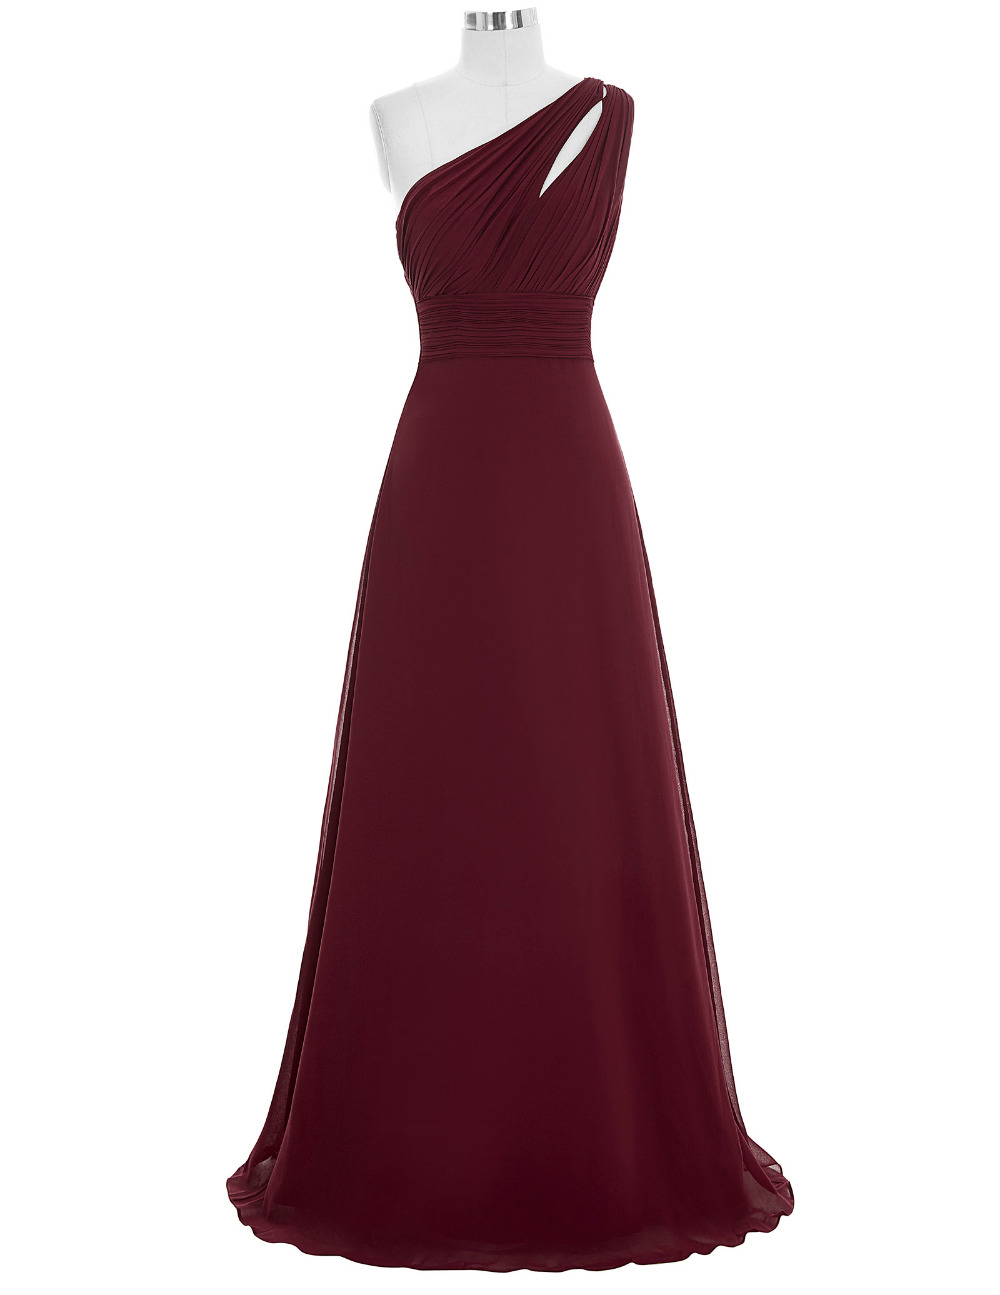 Sexy One Shoulder Chiffon Burgundy Bridesmaid Dress,floor Length A Line Burgundy Bridesmaid Dresses,elegant Long Prom Dresses Party Evening Gown